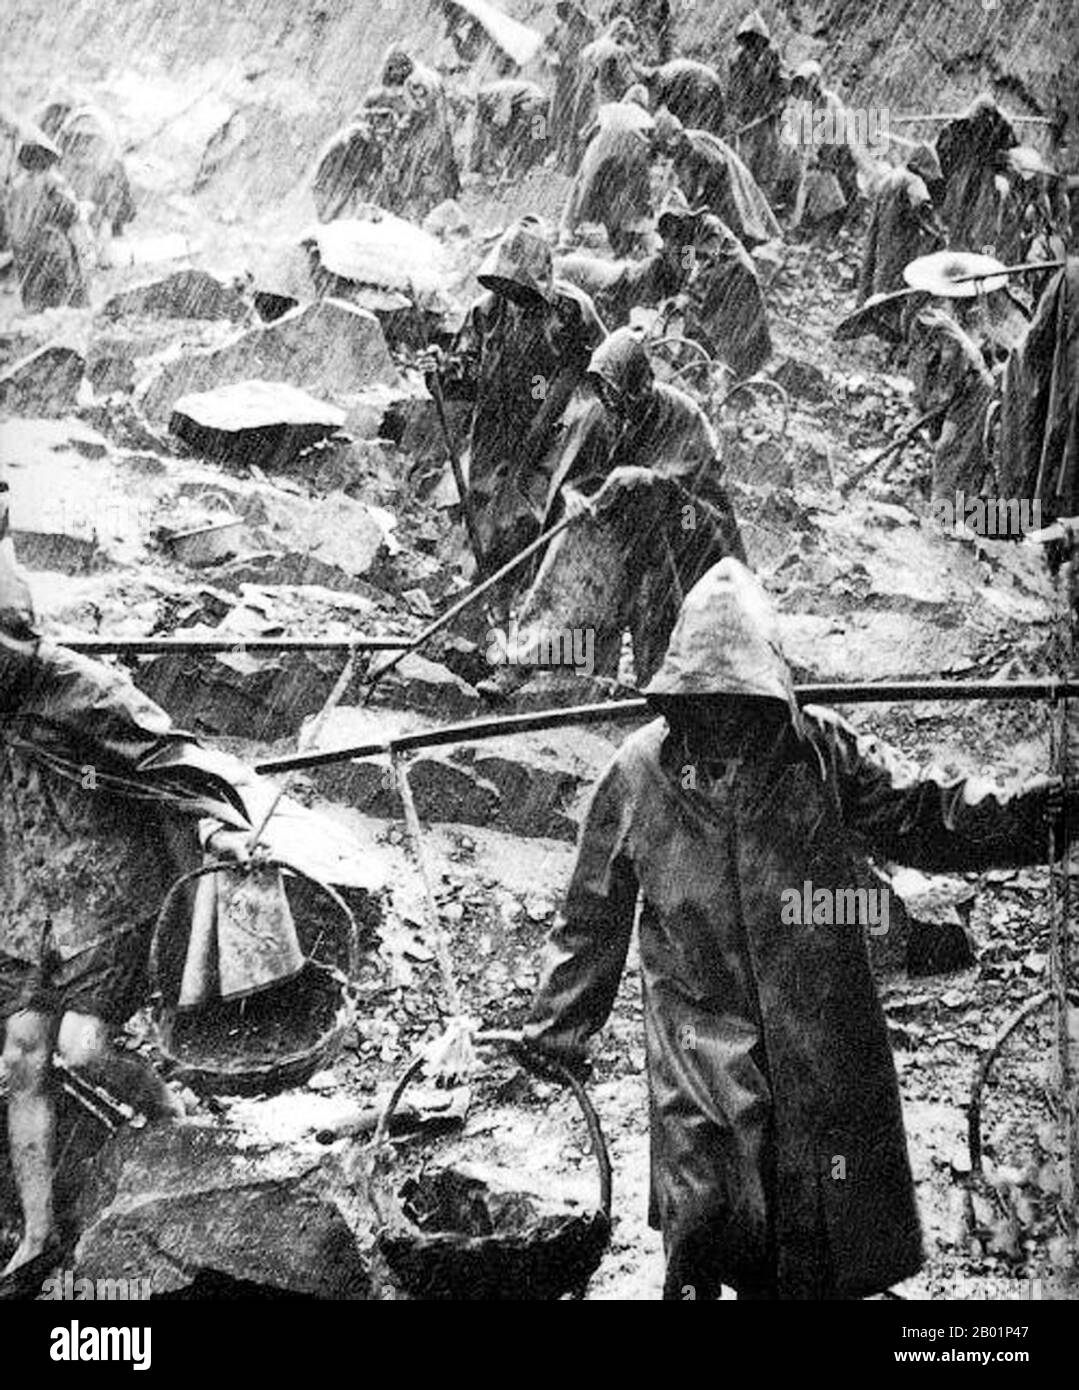 China: Hard labour in the rain during the Great Leap Forward (1958-1961).  The Great Leap Forward of the People's Republic of China (PRC) was an economic and social campaign of the Communist Party of China (CPC), reflected in planning decisions from 1958 to 1961, which aimed to use China's vast population to rapidly transform the country from an agrarian economy into a modern communist society through the process of rapid industrialisation, and collectivisation. Mao Zedong led the campaign based on the Theory of Productive Forces. Stock Photo